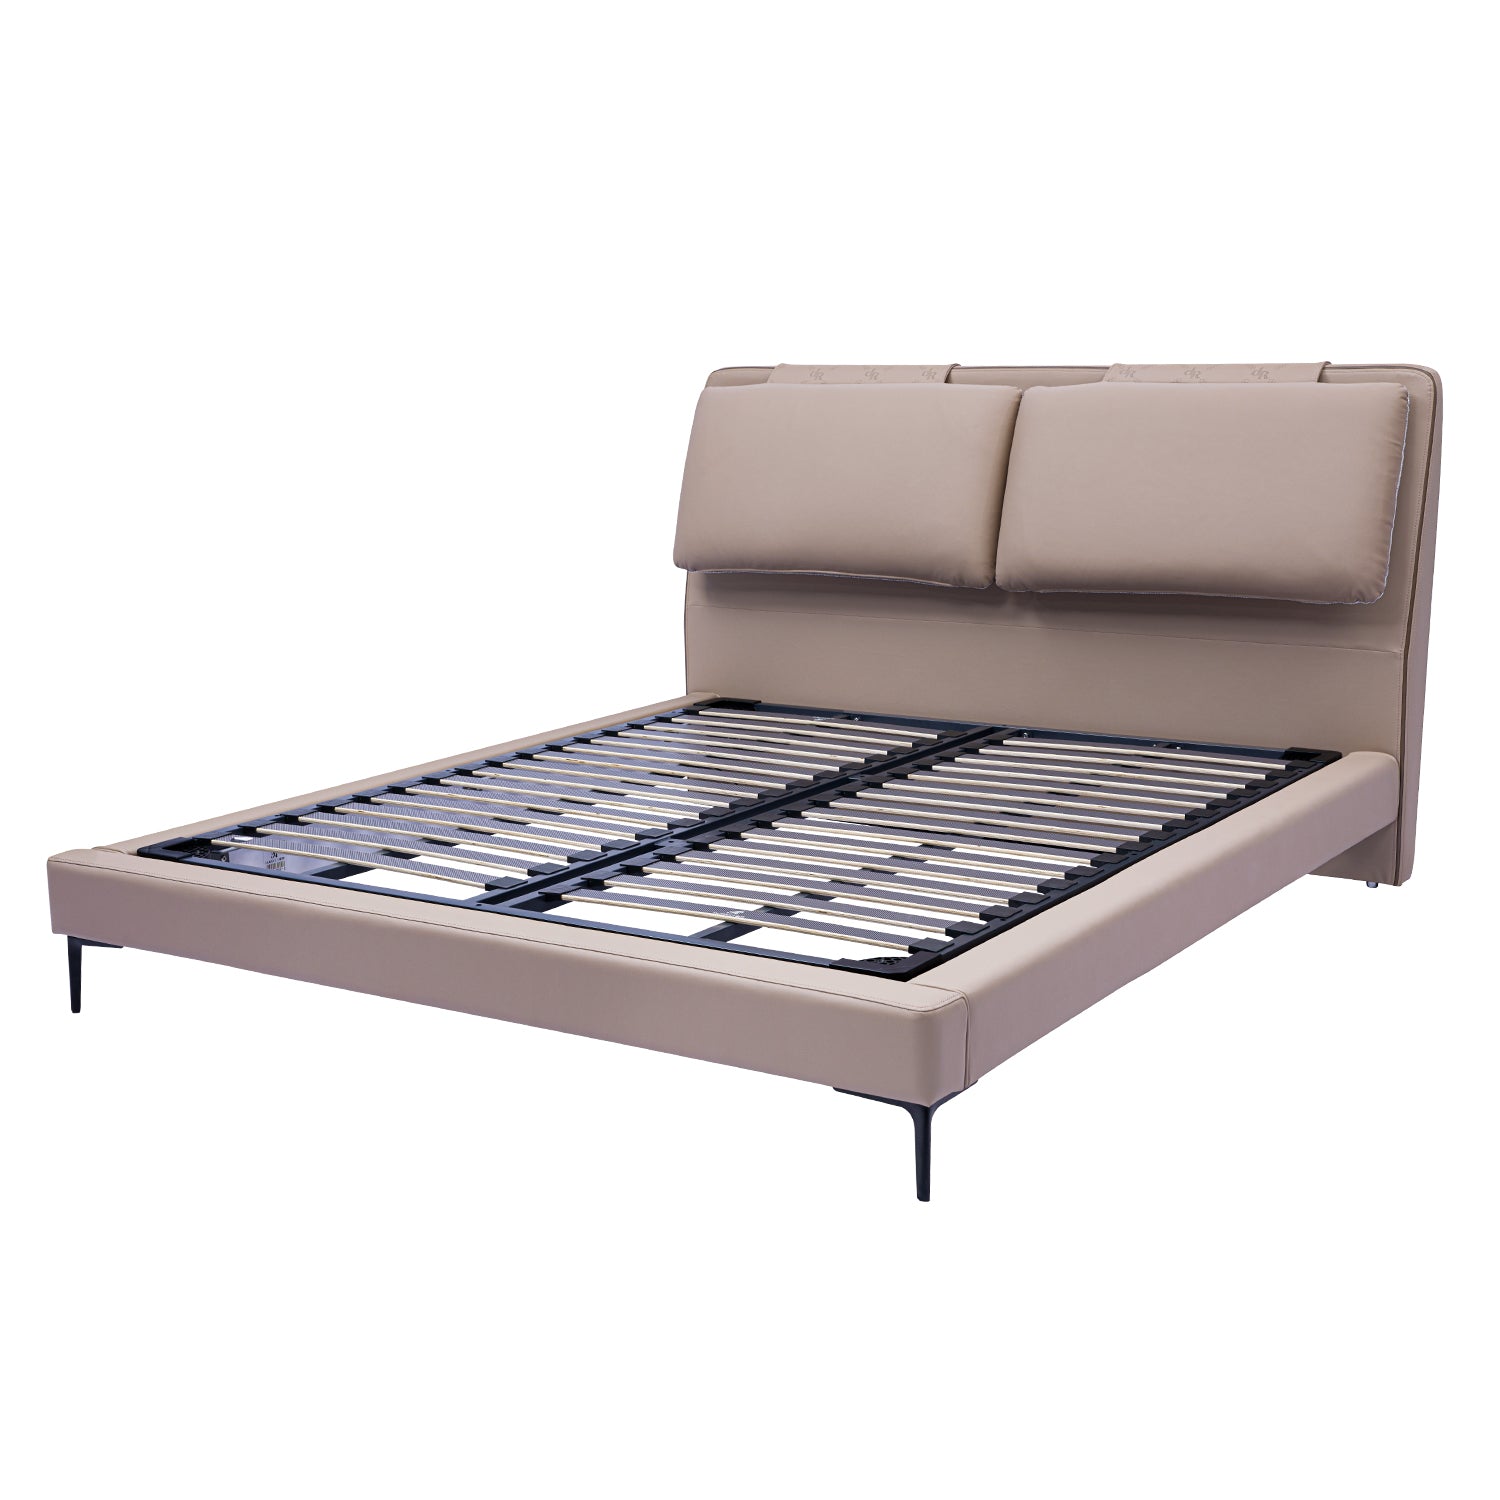 DeRUCCI Bed Frame BOC1 - 006 featuring a modern design with a padded headboard and metal slat base. Elegant and sturdy bed frame on black metal legs.